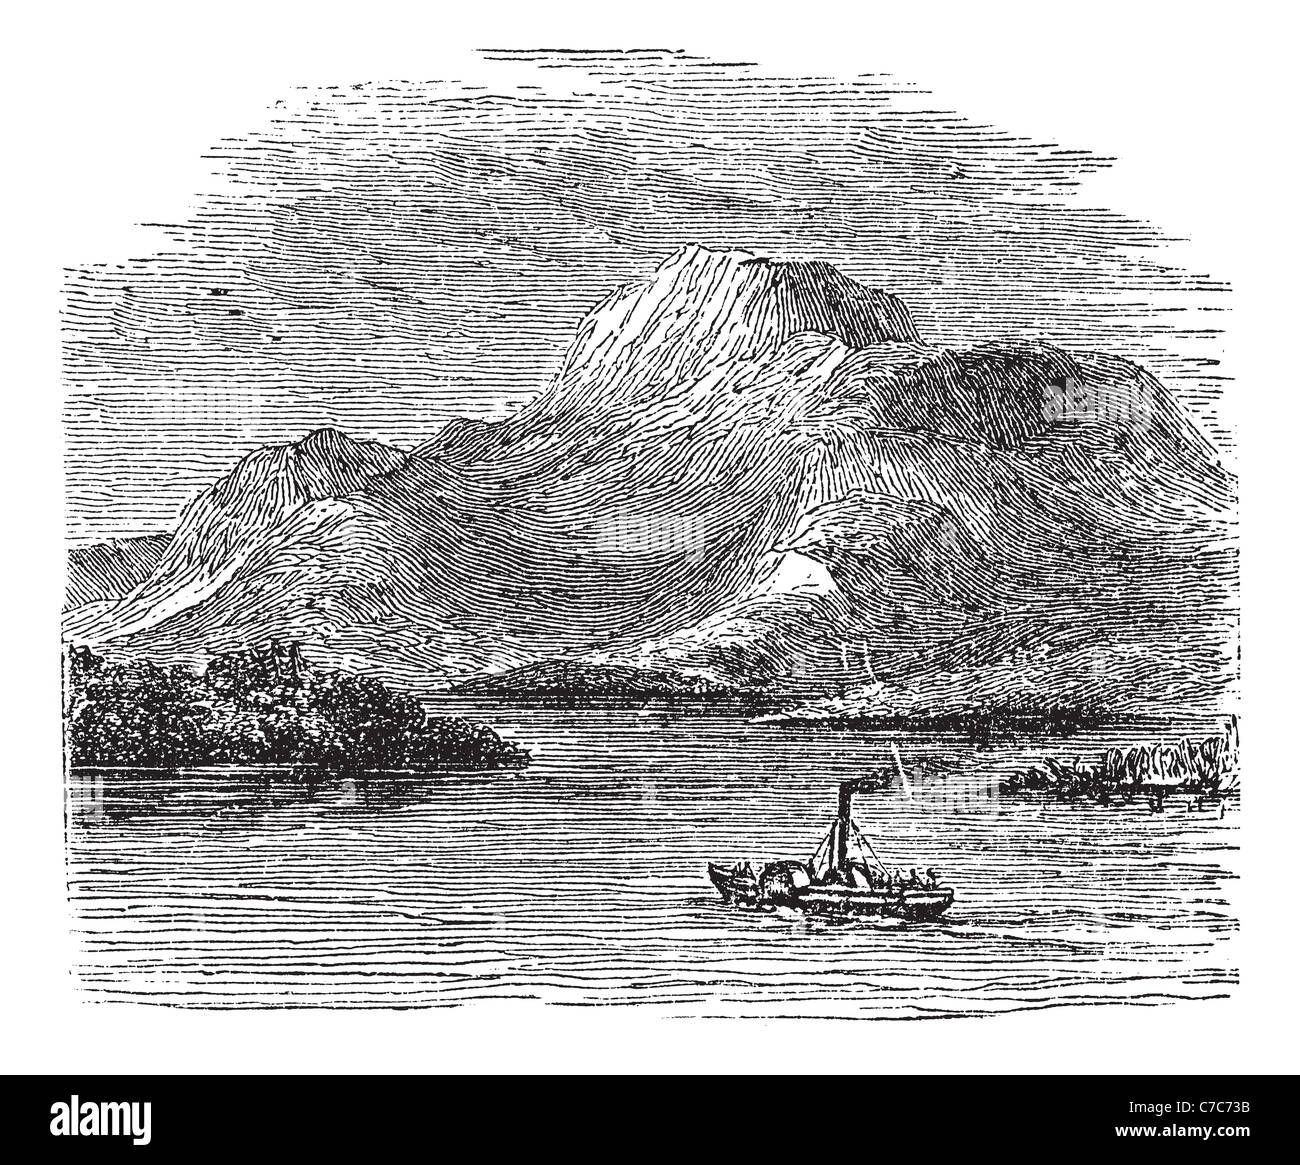 Loch Lomond on Highland Boundary Fault, Scotland, during the 1890s, vintage engraving. Old engraved illustration of Loch Lomond Stock Photo